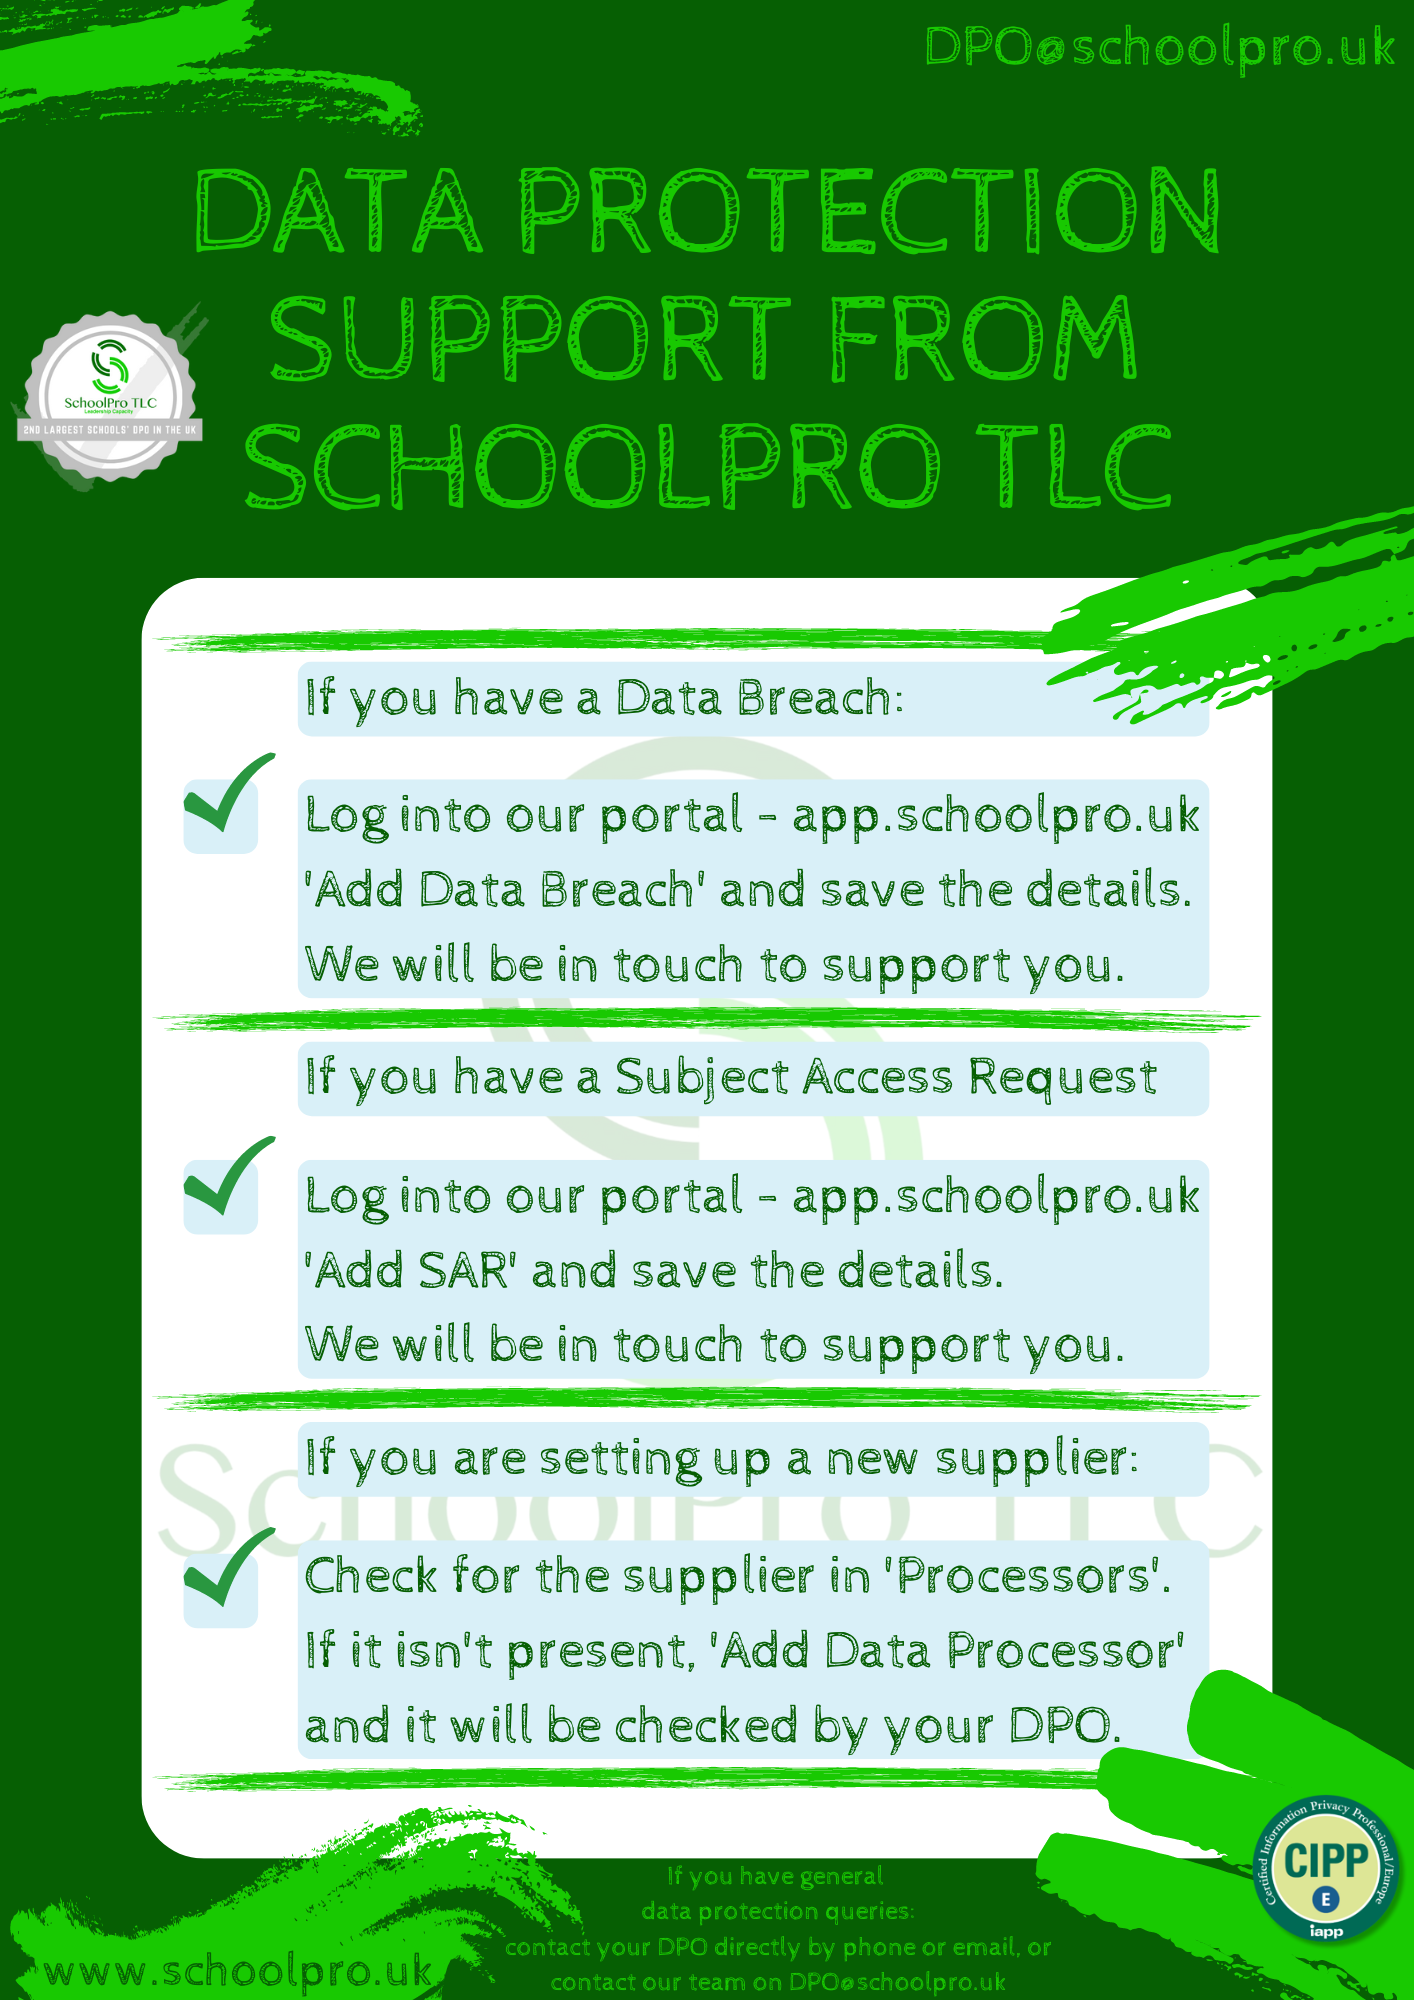 Single Page Reminder of Support Options and Methods for SchoolPro TLC's DPO Service